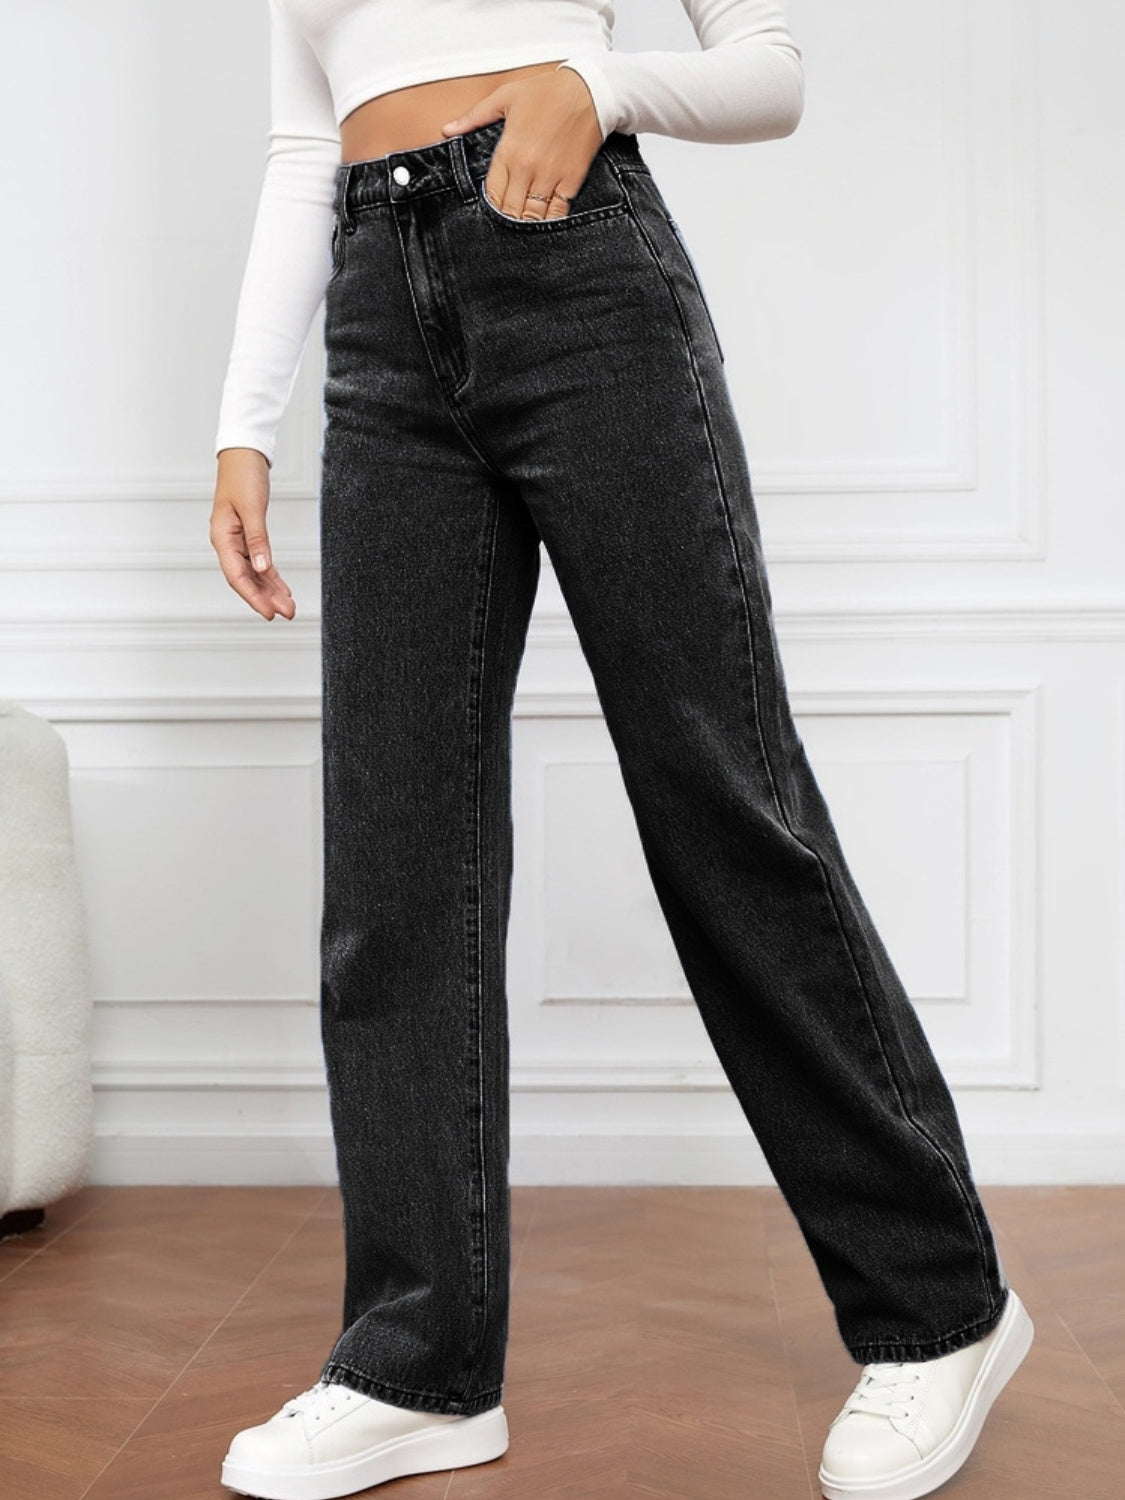 Shop the latest High Waist Straight Jeans for a chic, versatile look. Perfect fit, all-day comfort, and timeless style. Order yours now!